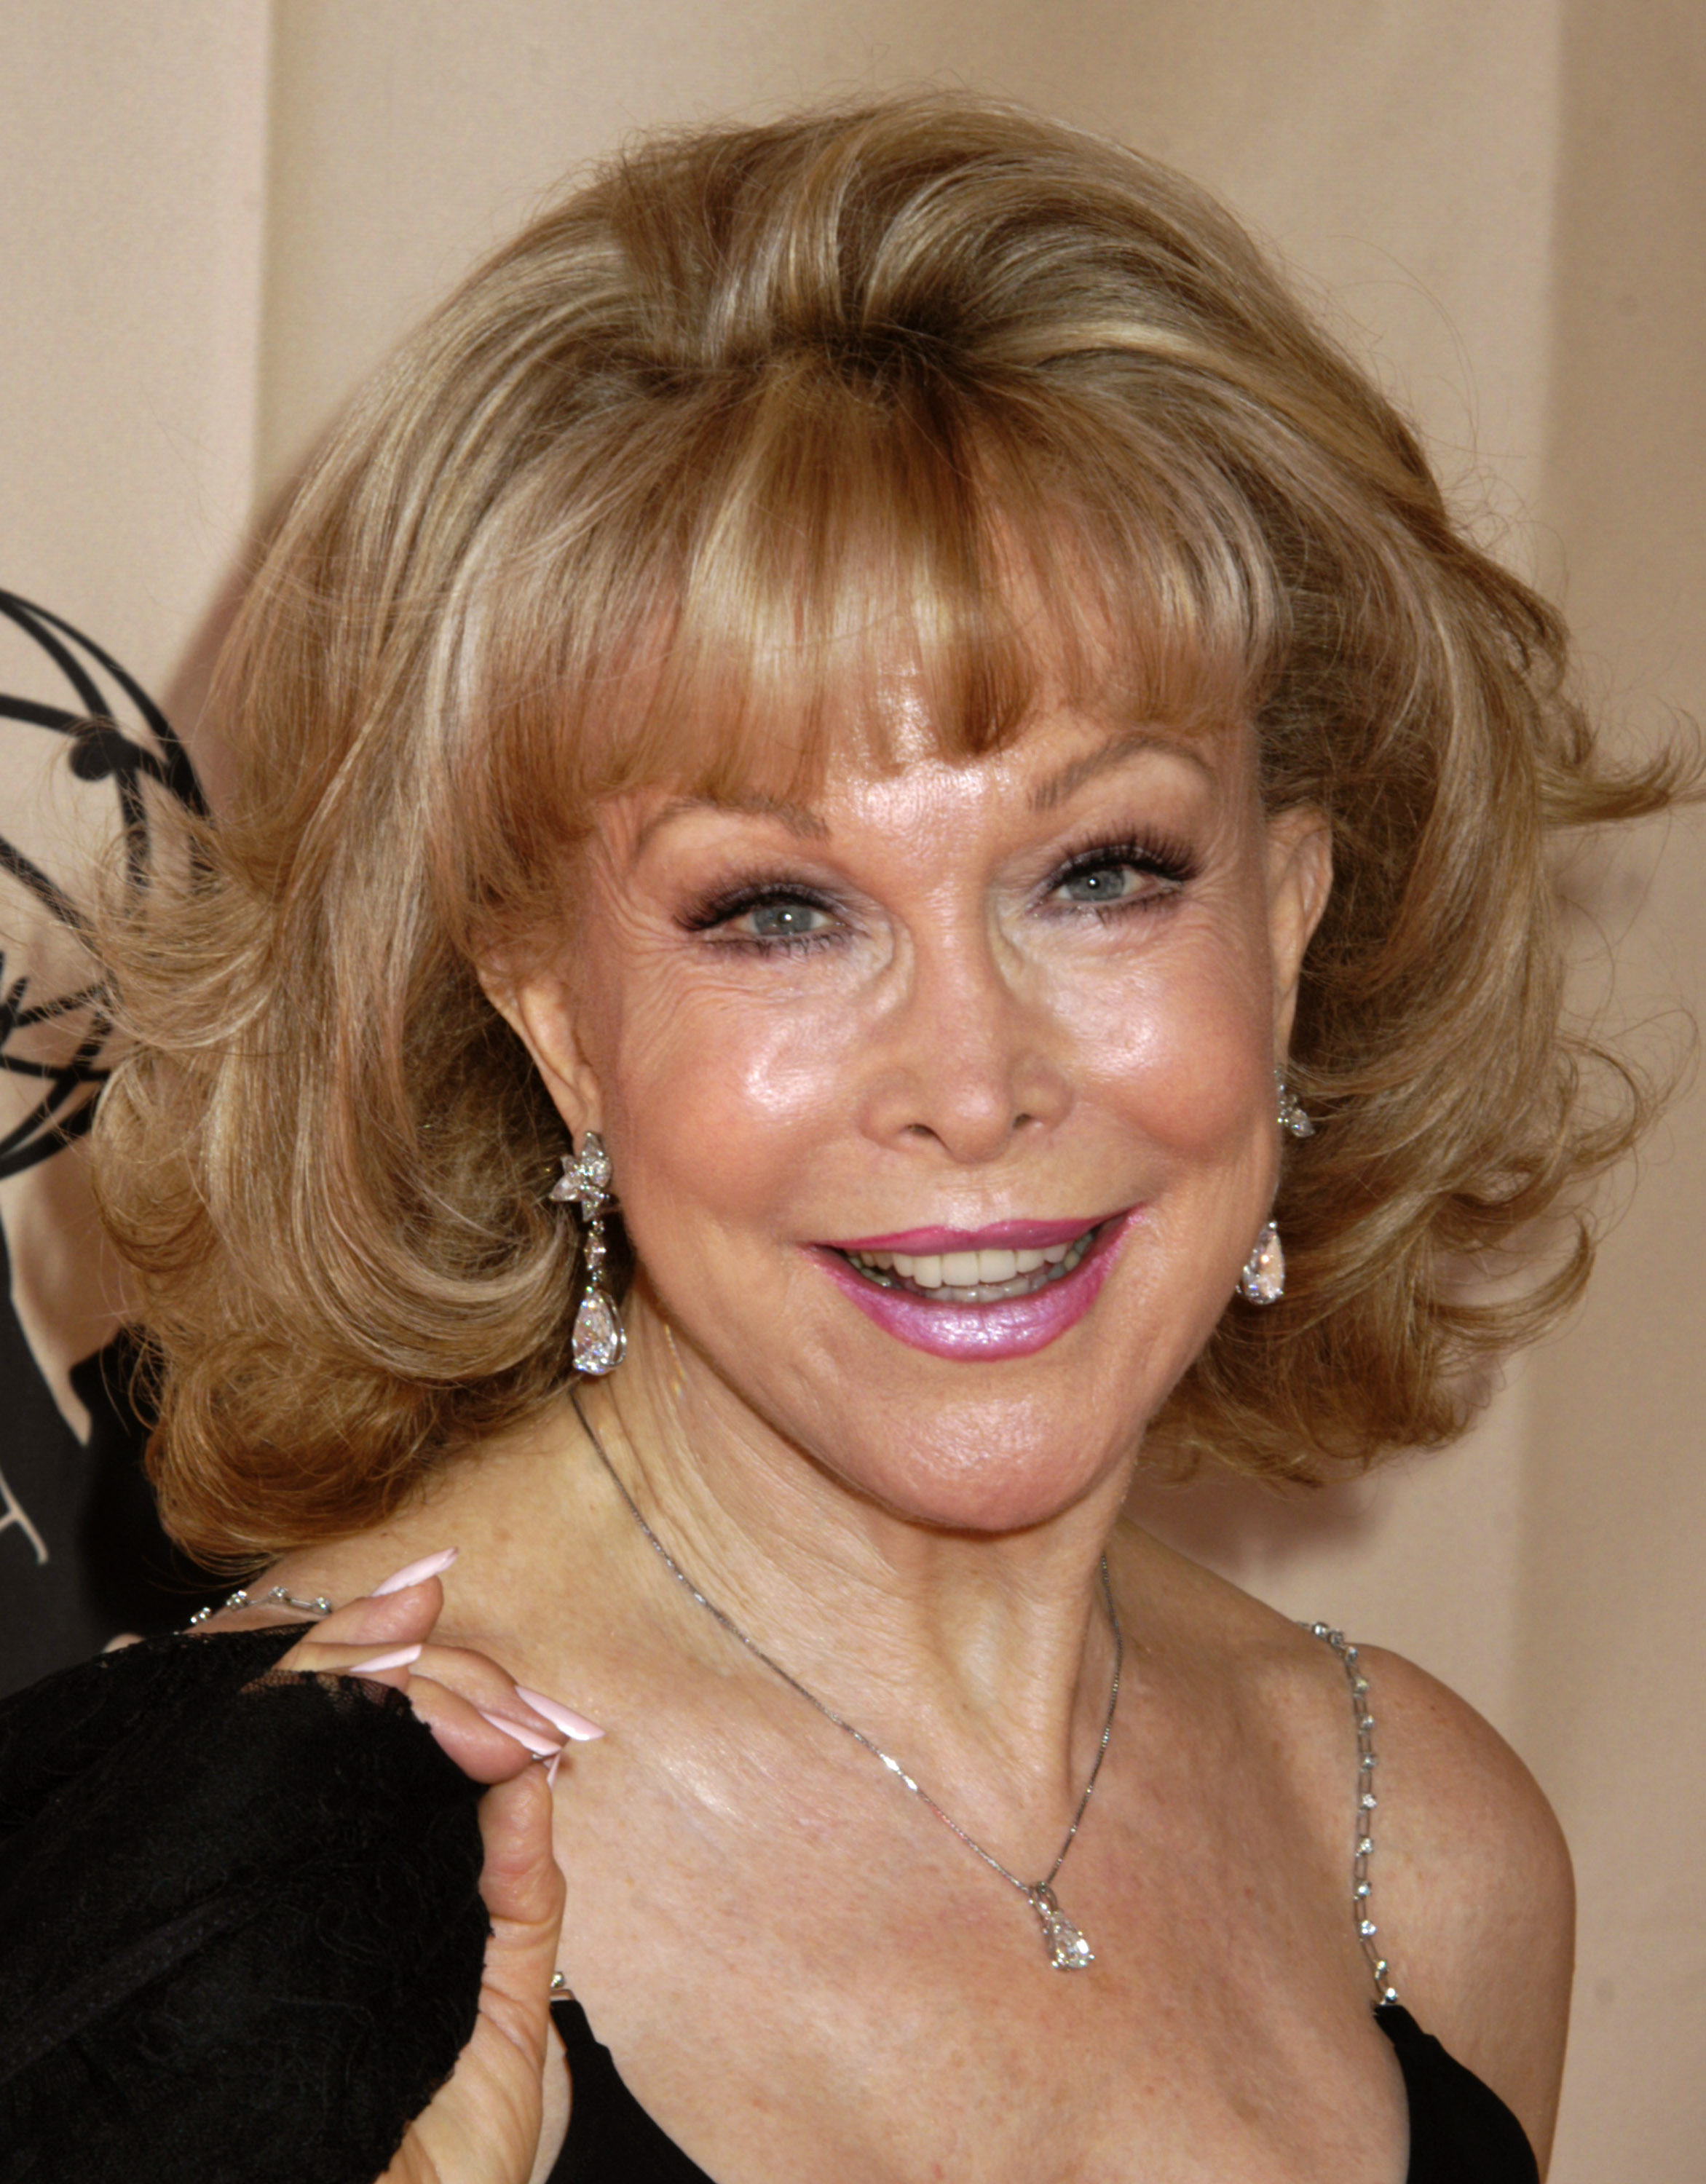 Barbara Eden at the Academy of Television Arts & Sciences in 2005 in North Hollywood, California. | Source: Getty Images